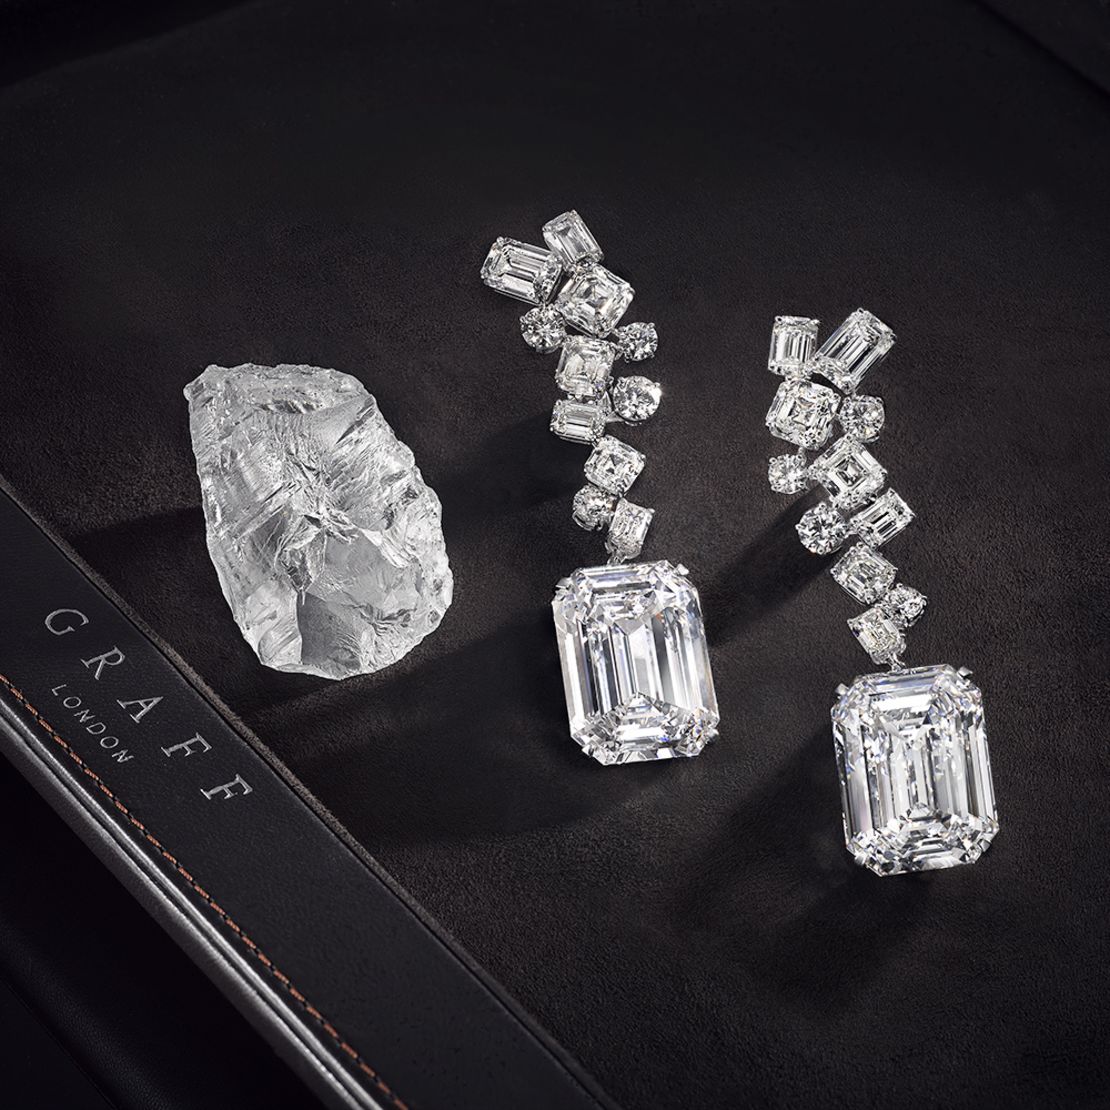 The Graff 'Eternal Twins' hail from a 269-carat rough, cut into two identical 50.23ct emerald-cut gems.